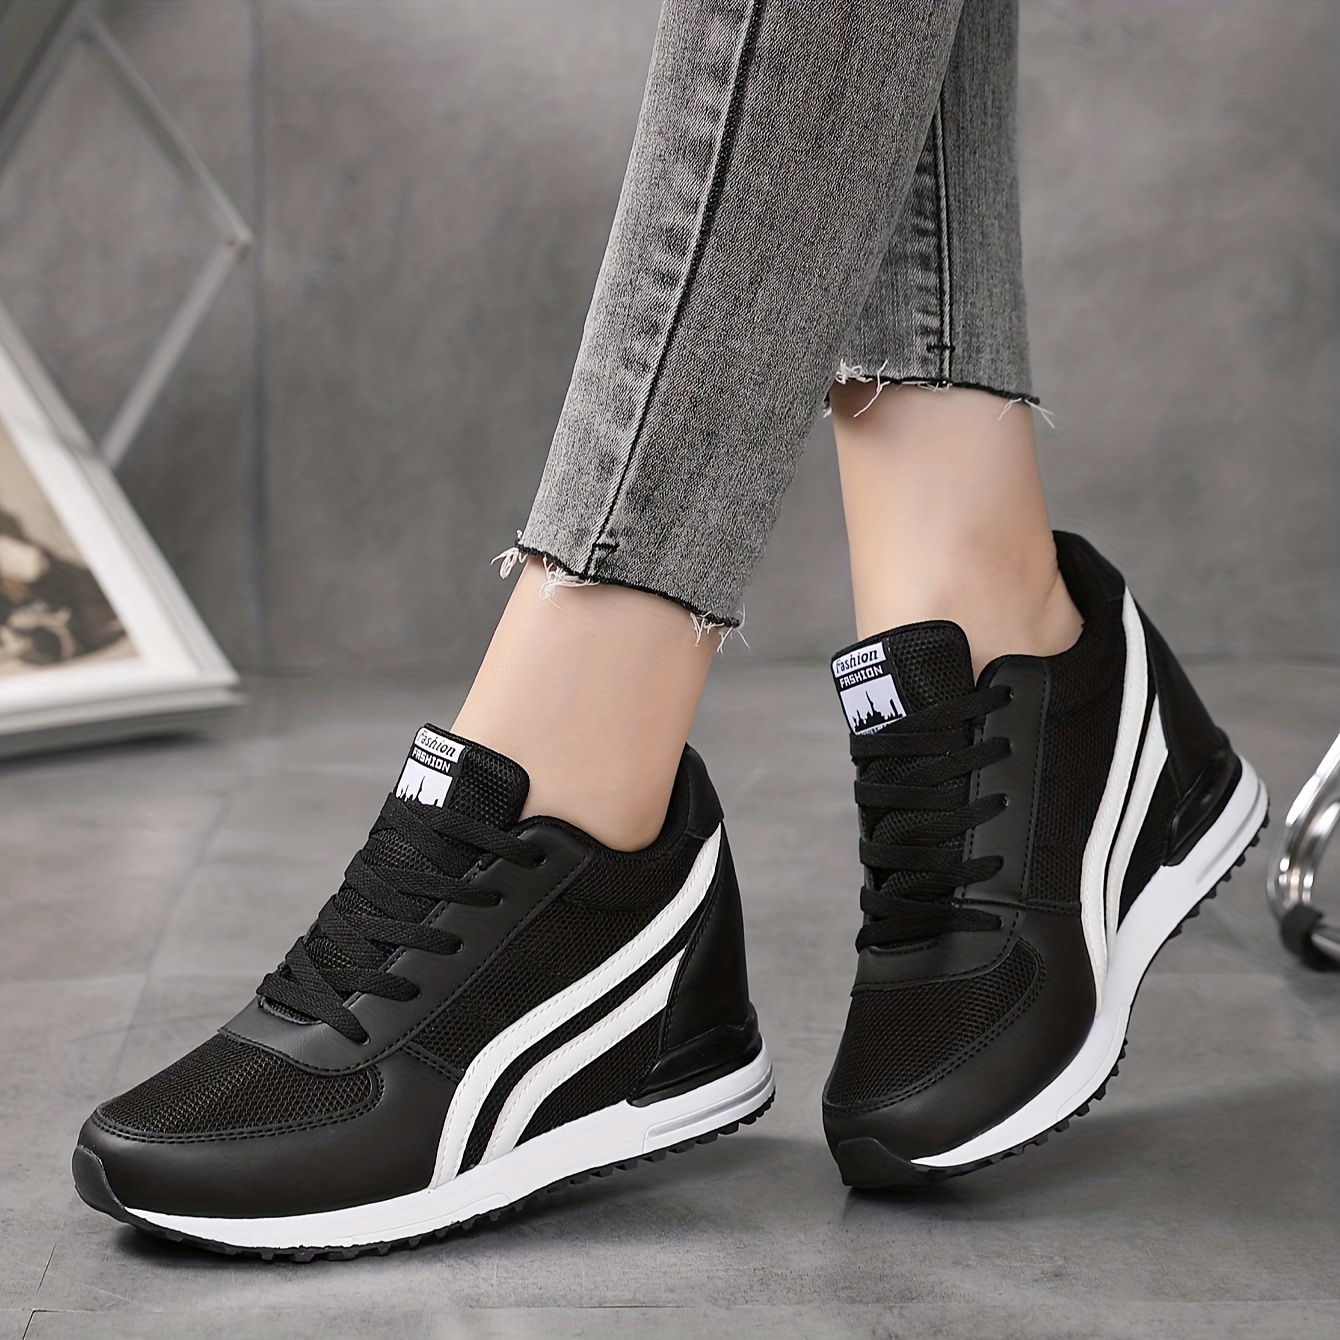 ACE SHOCK Women's Wedge Sneakers with Hidden Heel Lace-up Ankle High P –  ACESHOCKSTORE